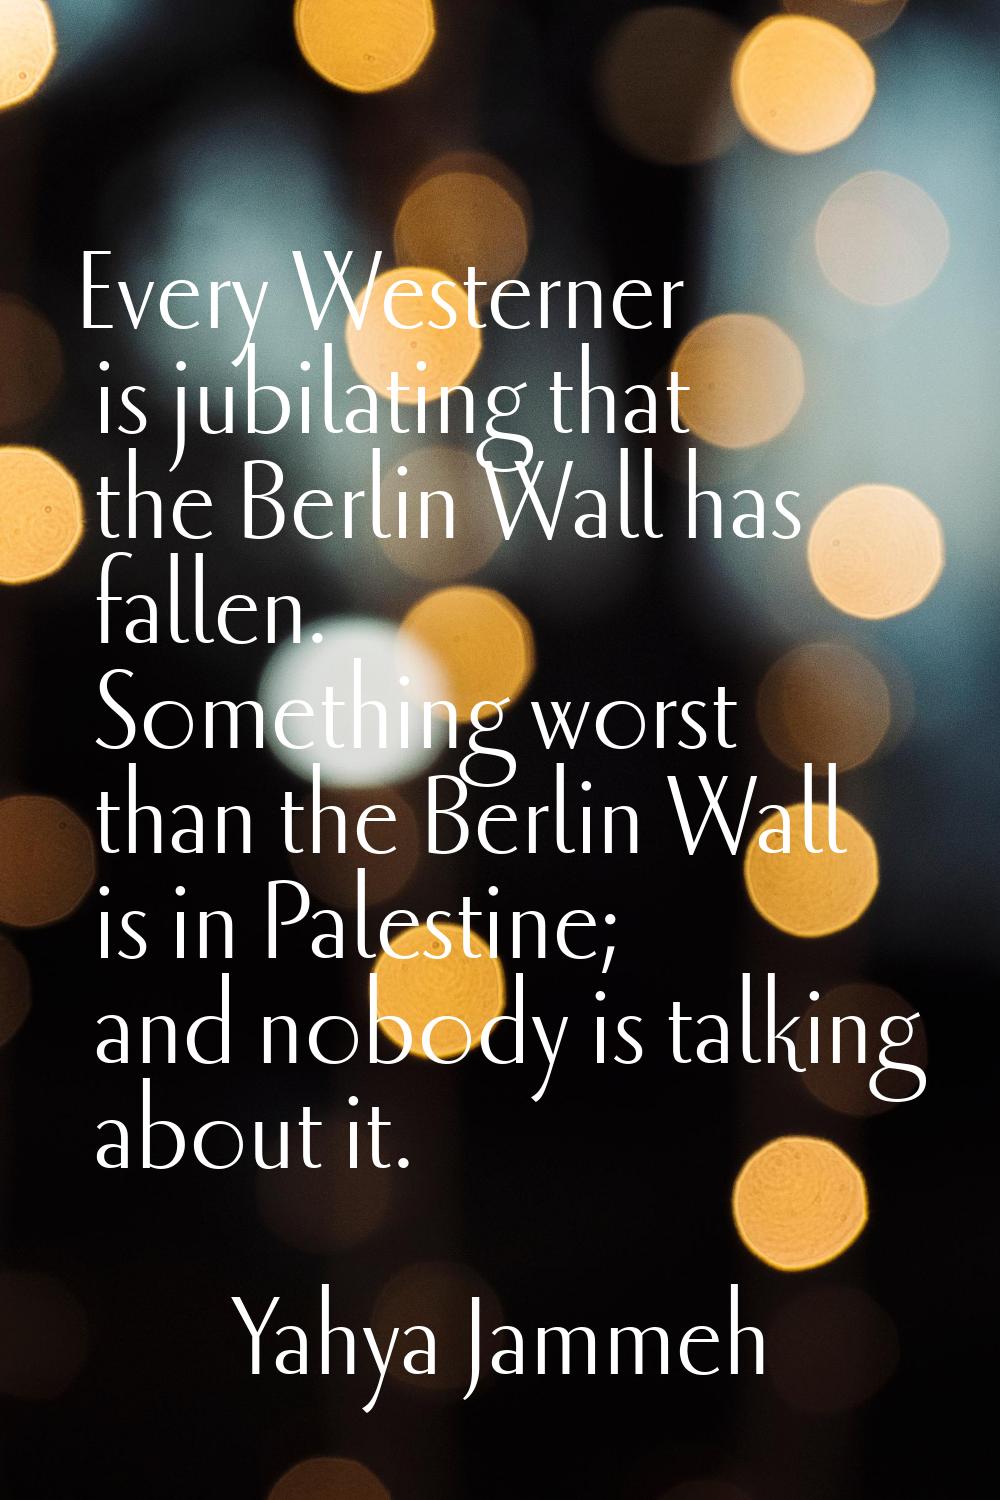 Every Westerner is jubilating that the Berlin Wall has fallen. Something worst than the Berlin Wall